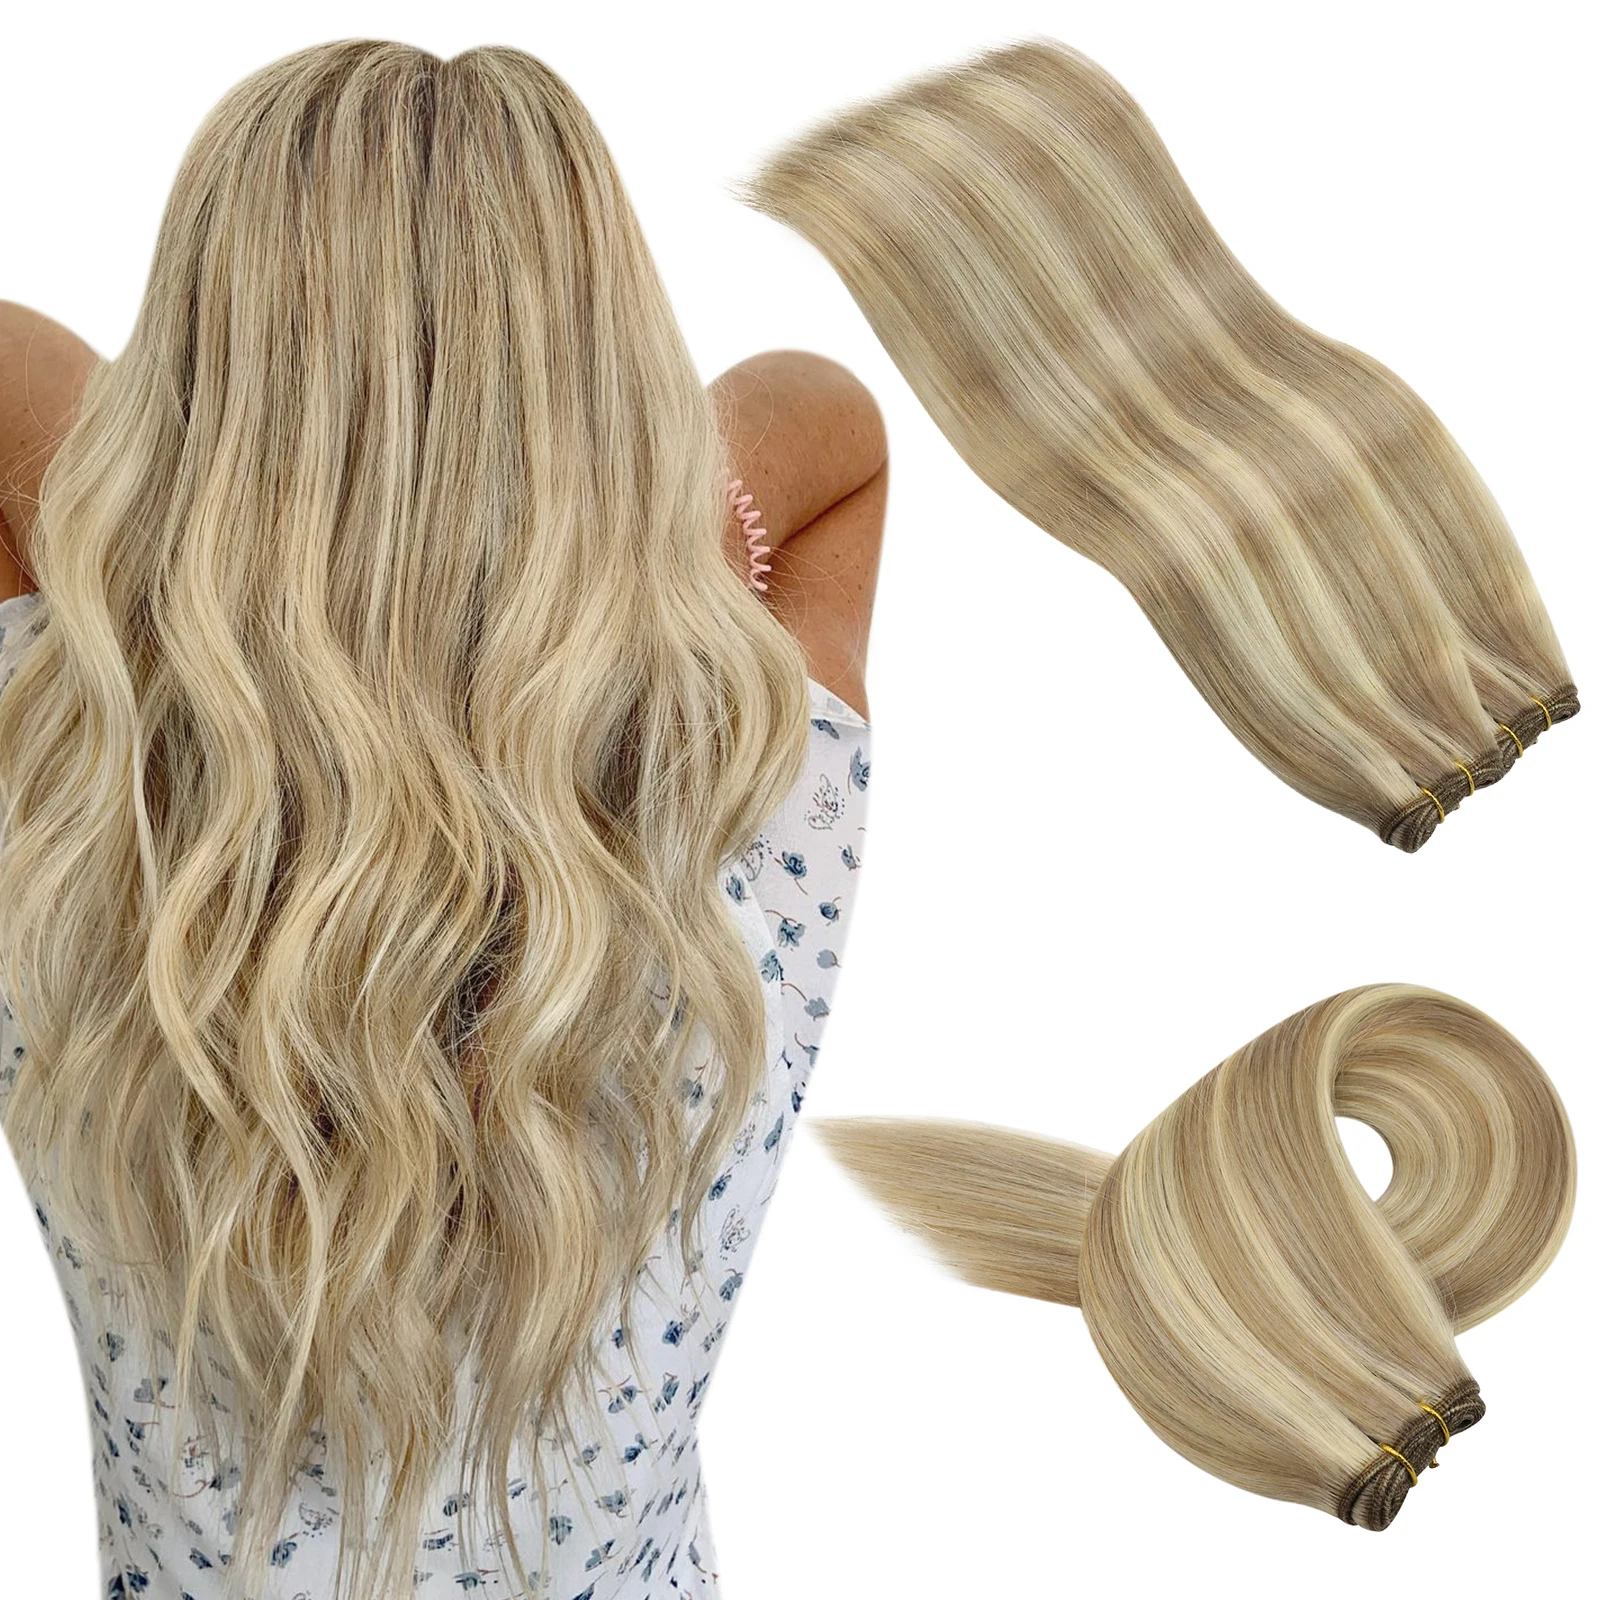 

Moresoo High Quality Hair Extensions #P16/22 Blonde Highlighted Color Remy Human Hair Weft